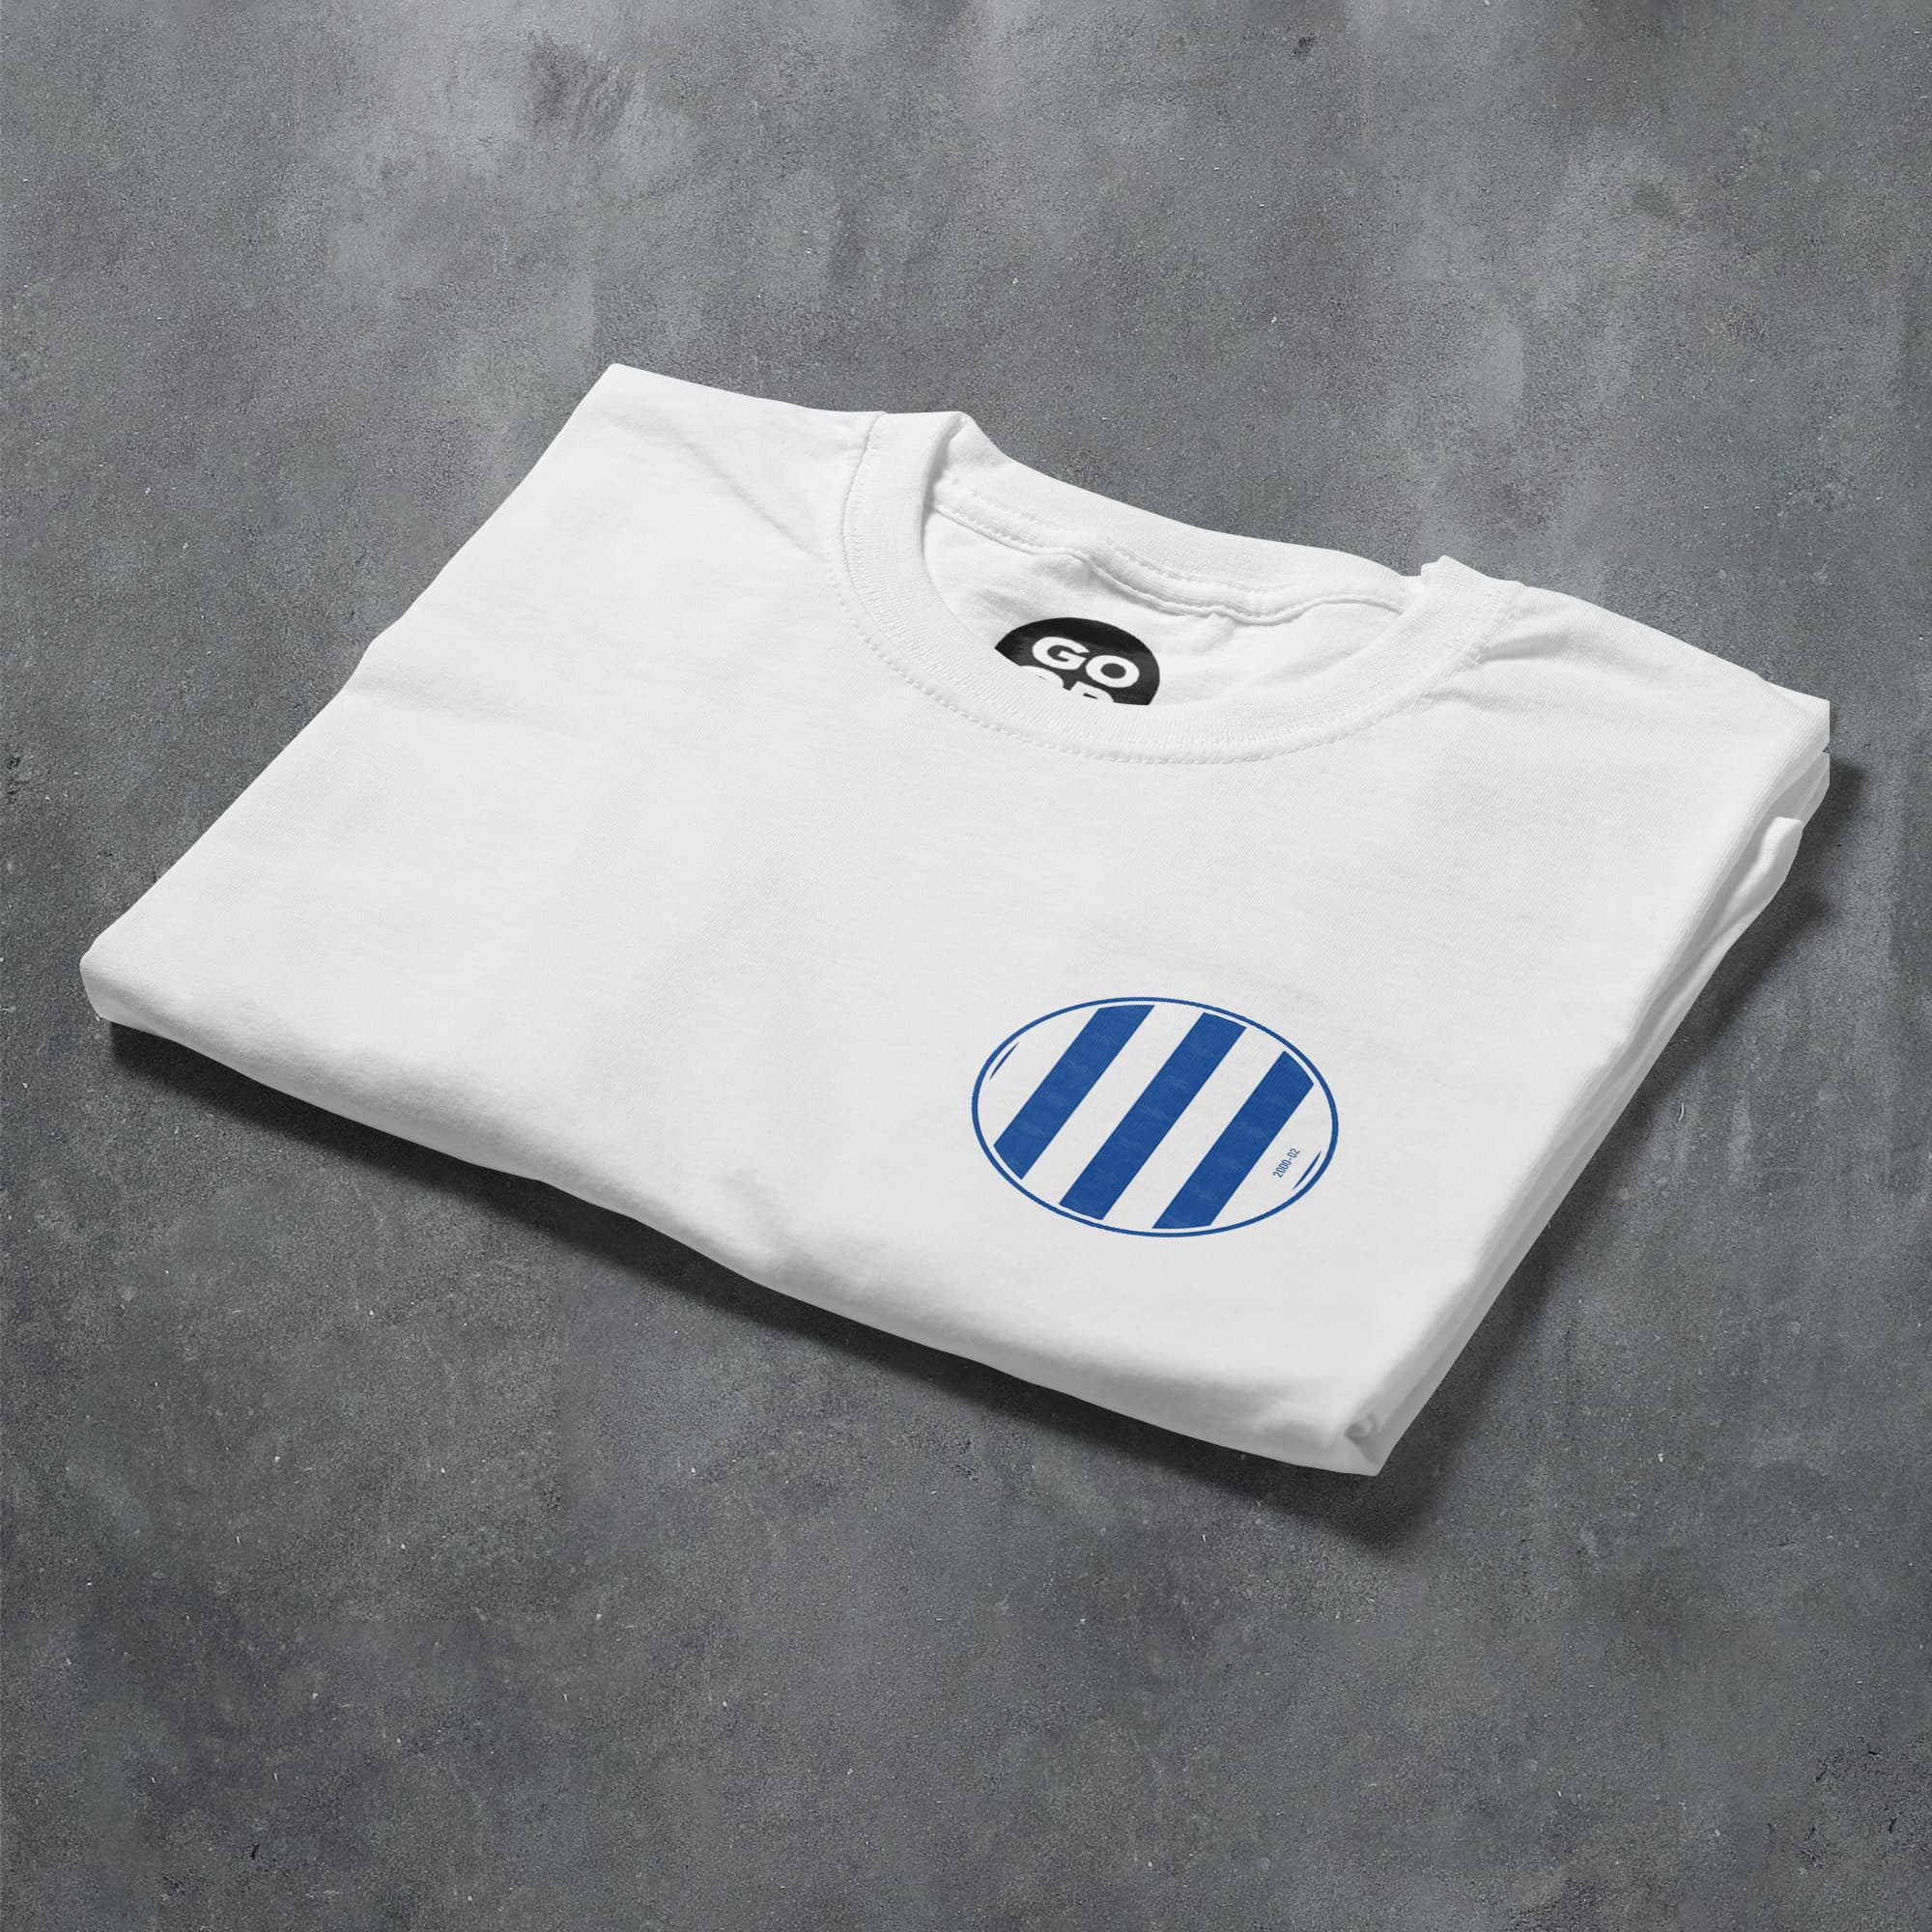 a white t - shirt with blue stripes on the chest